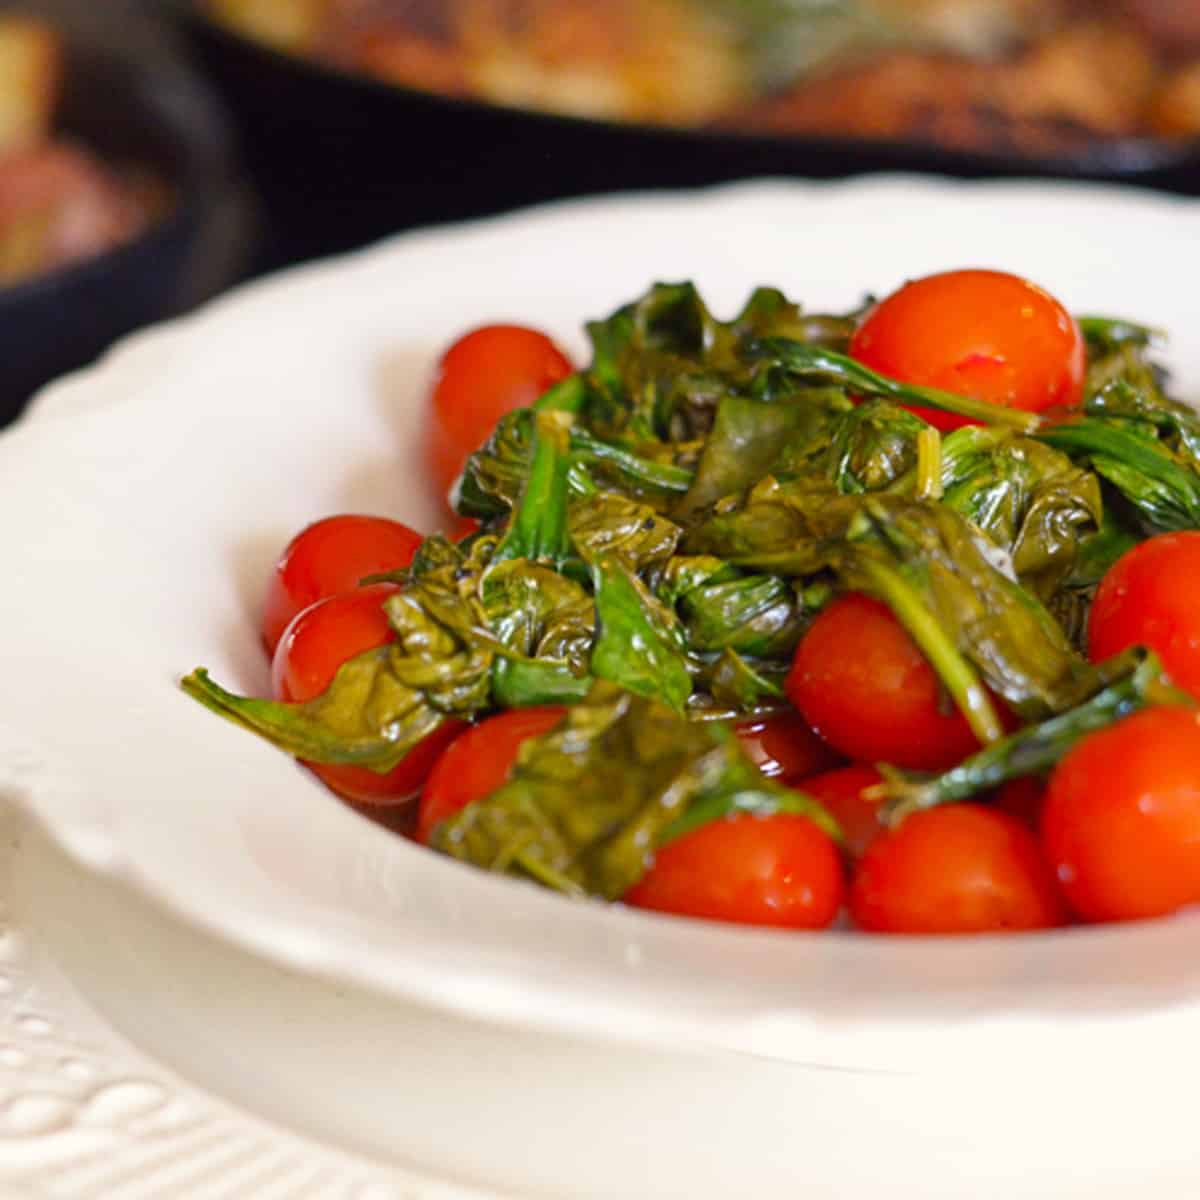 A bowl of wilted spinach and roasted tomatoes.